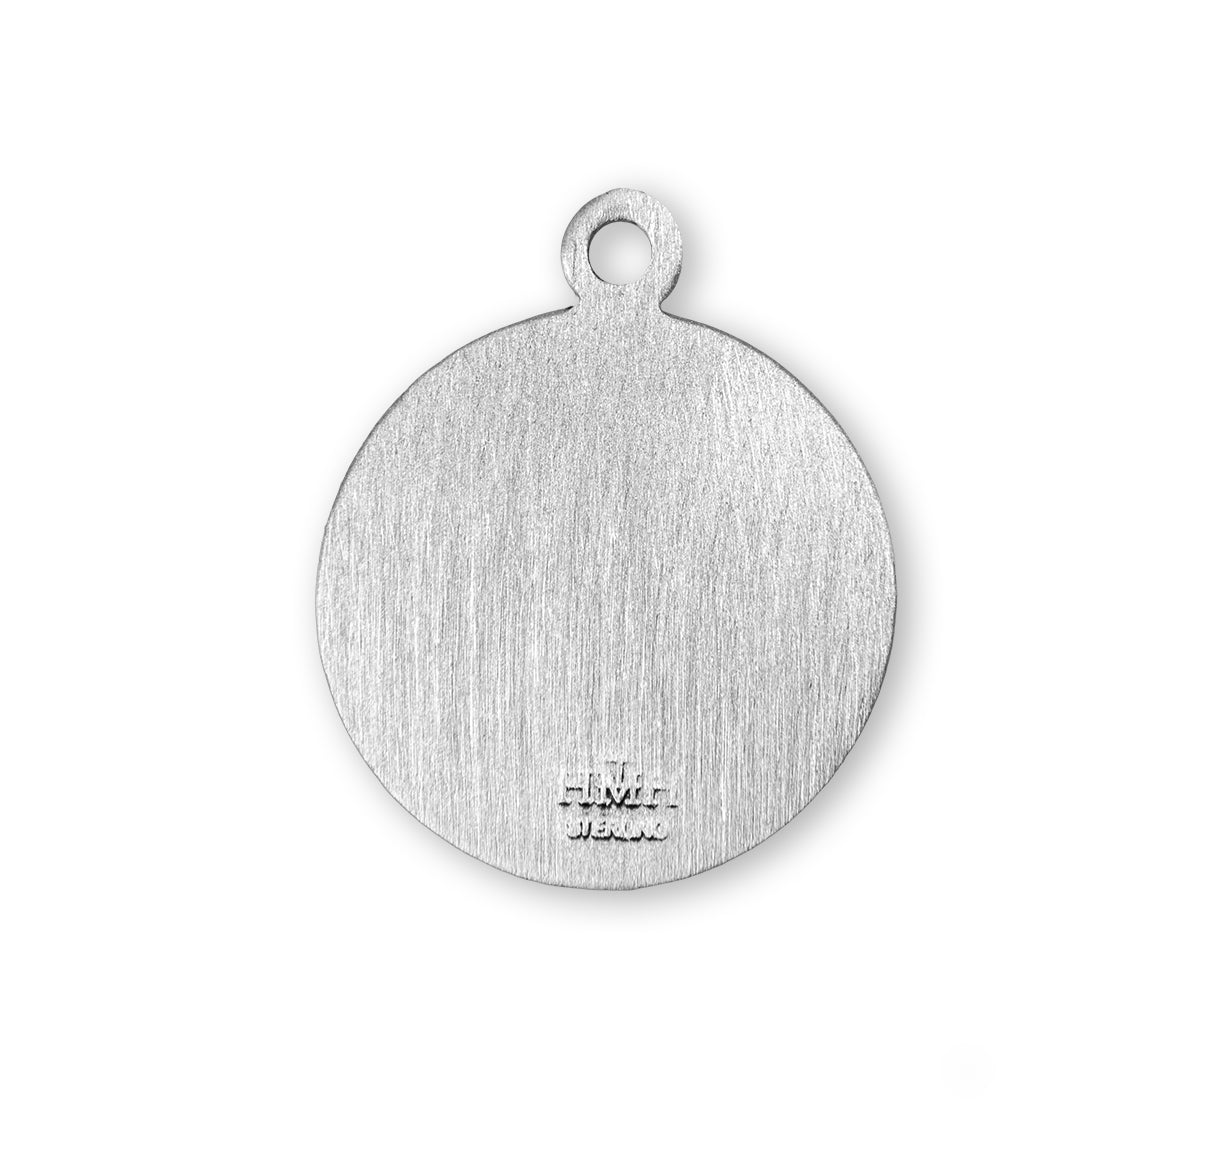 St. Timothy Sterling Silver Medal Necklace